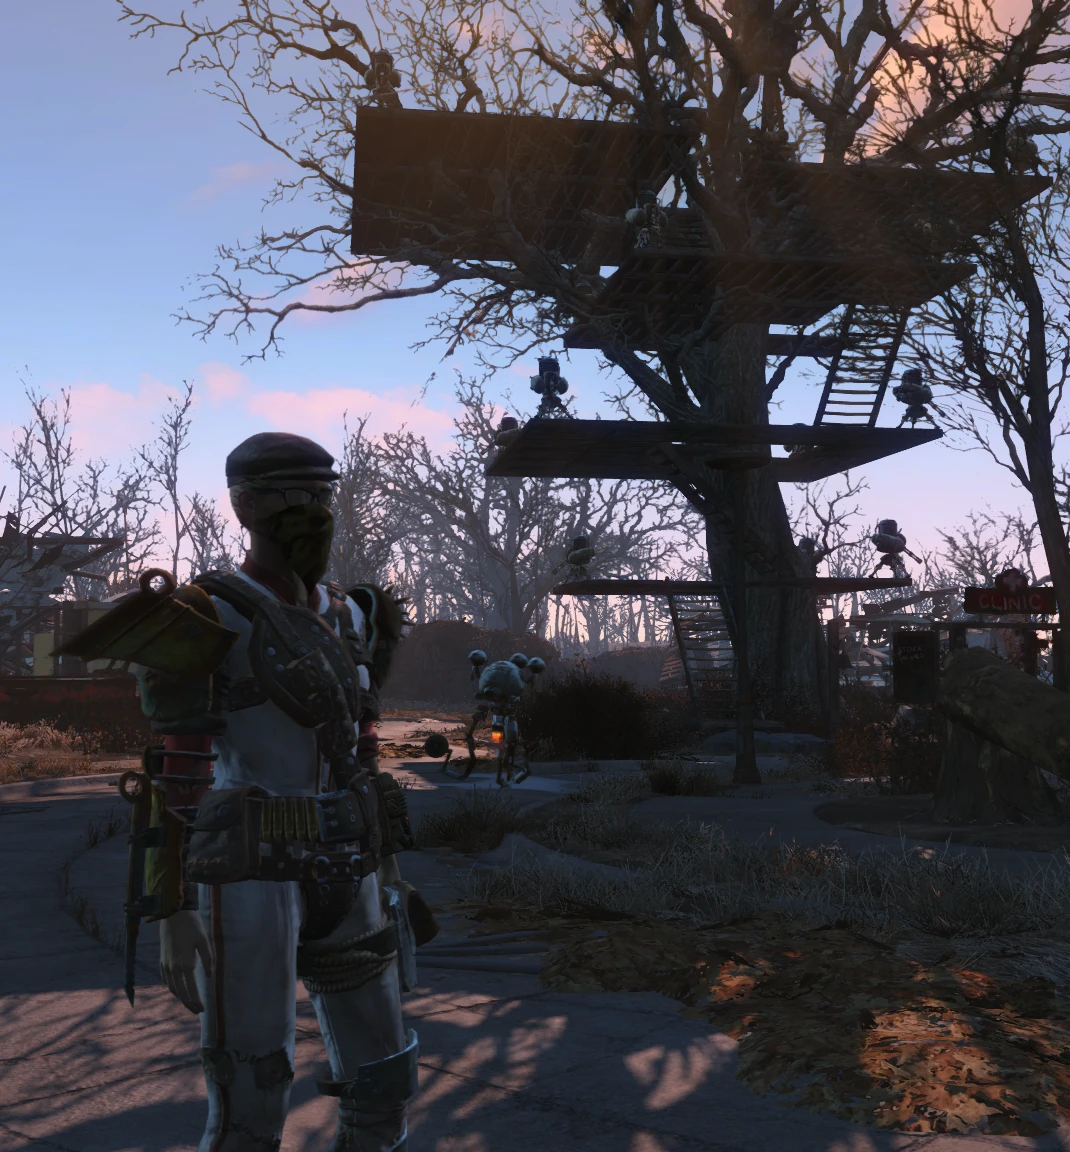 fallout 4 save in survival mode mod